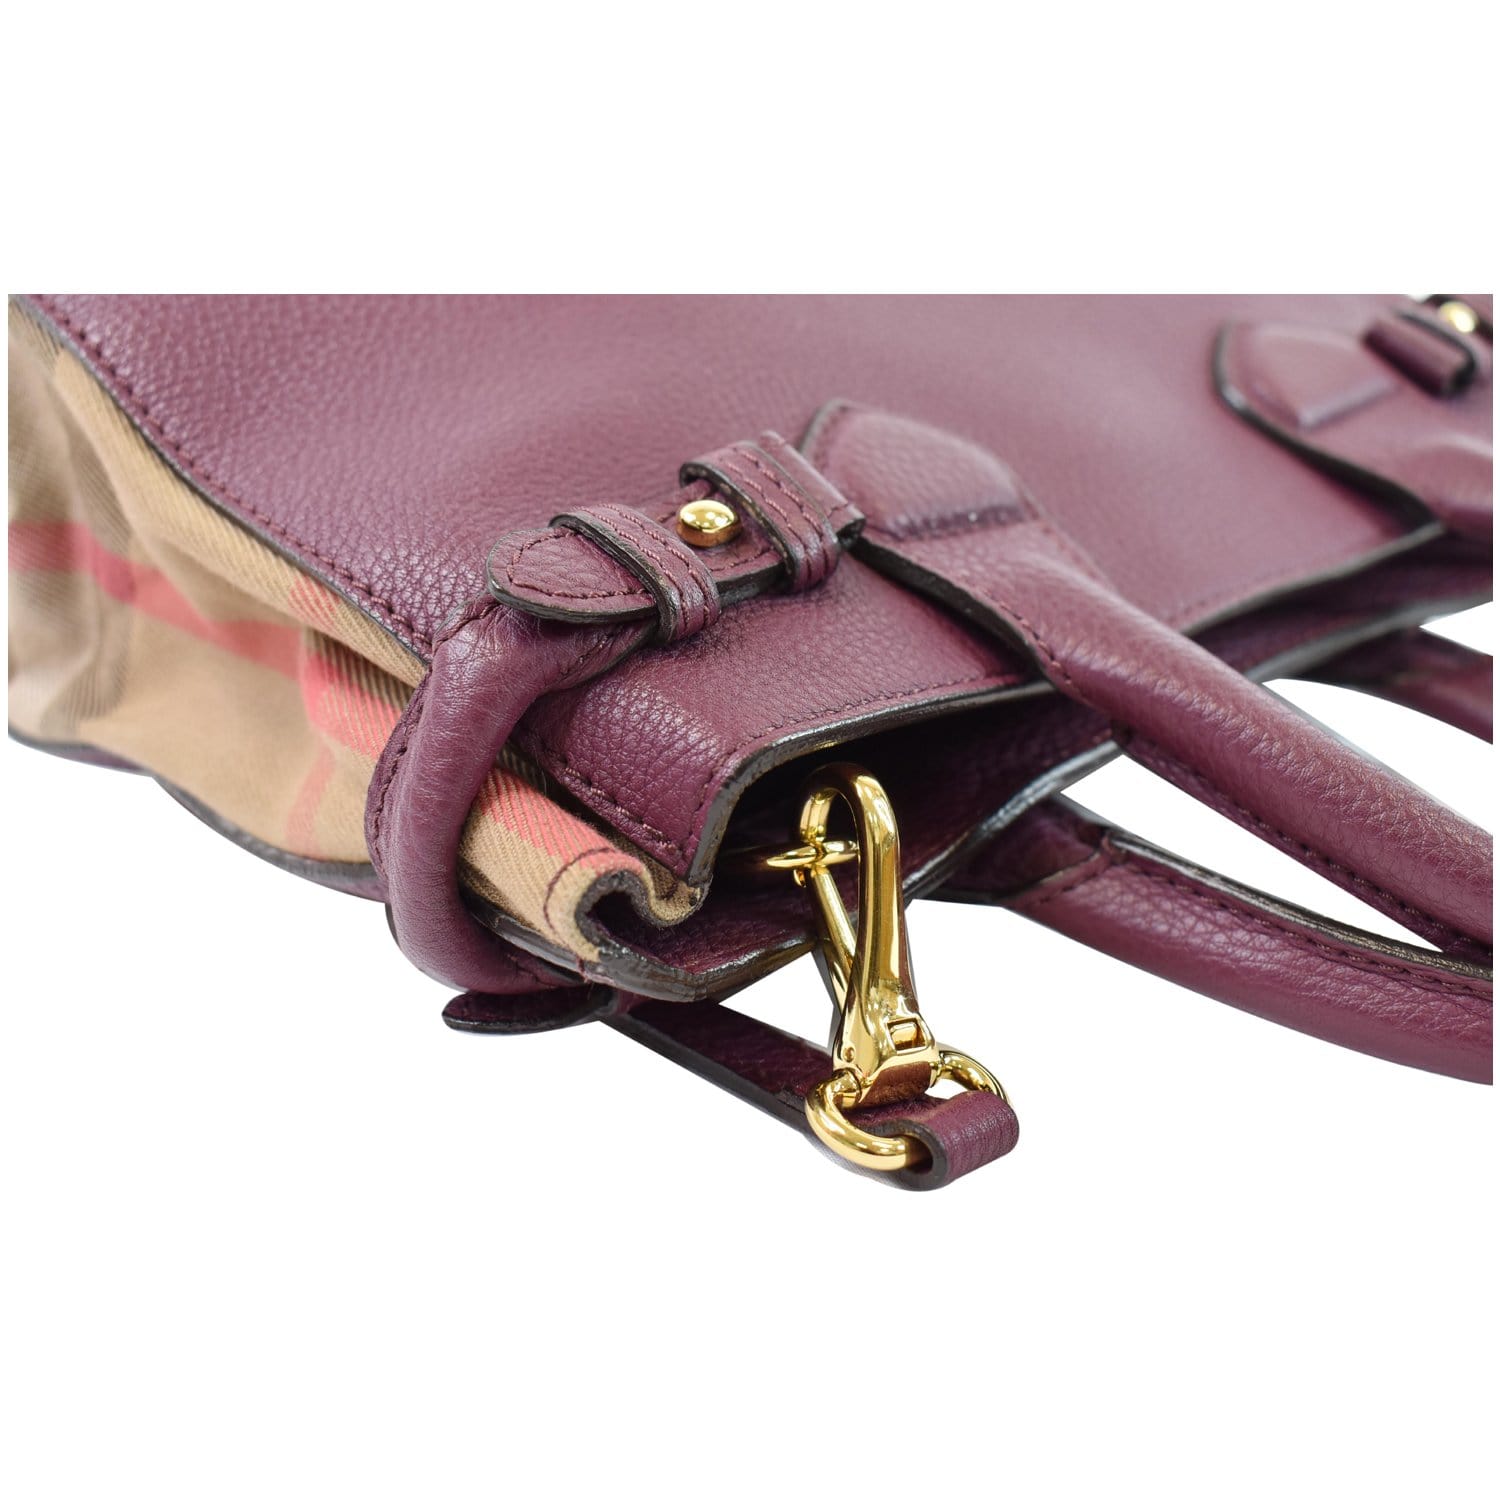 Burberry Burgundy Grainy Leather Small Buckle Tote Bag